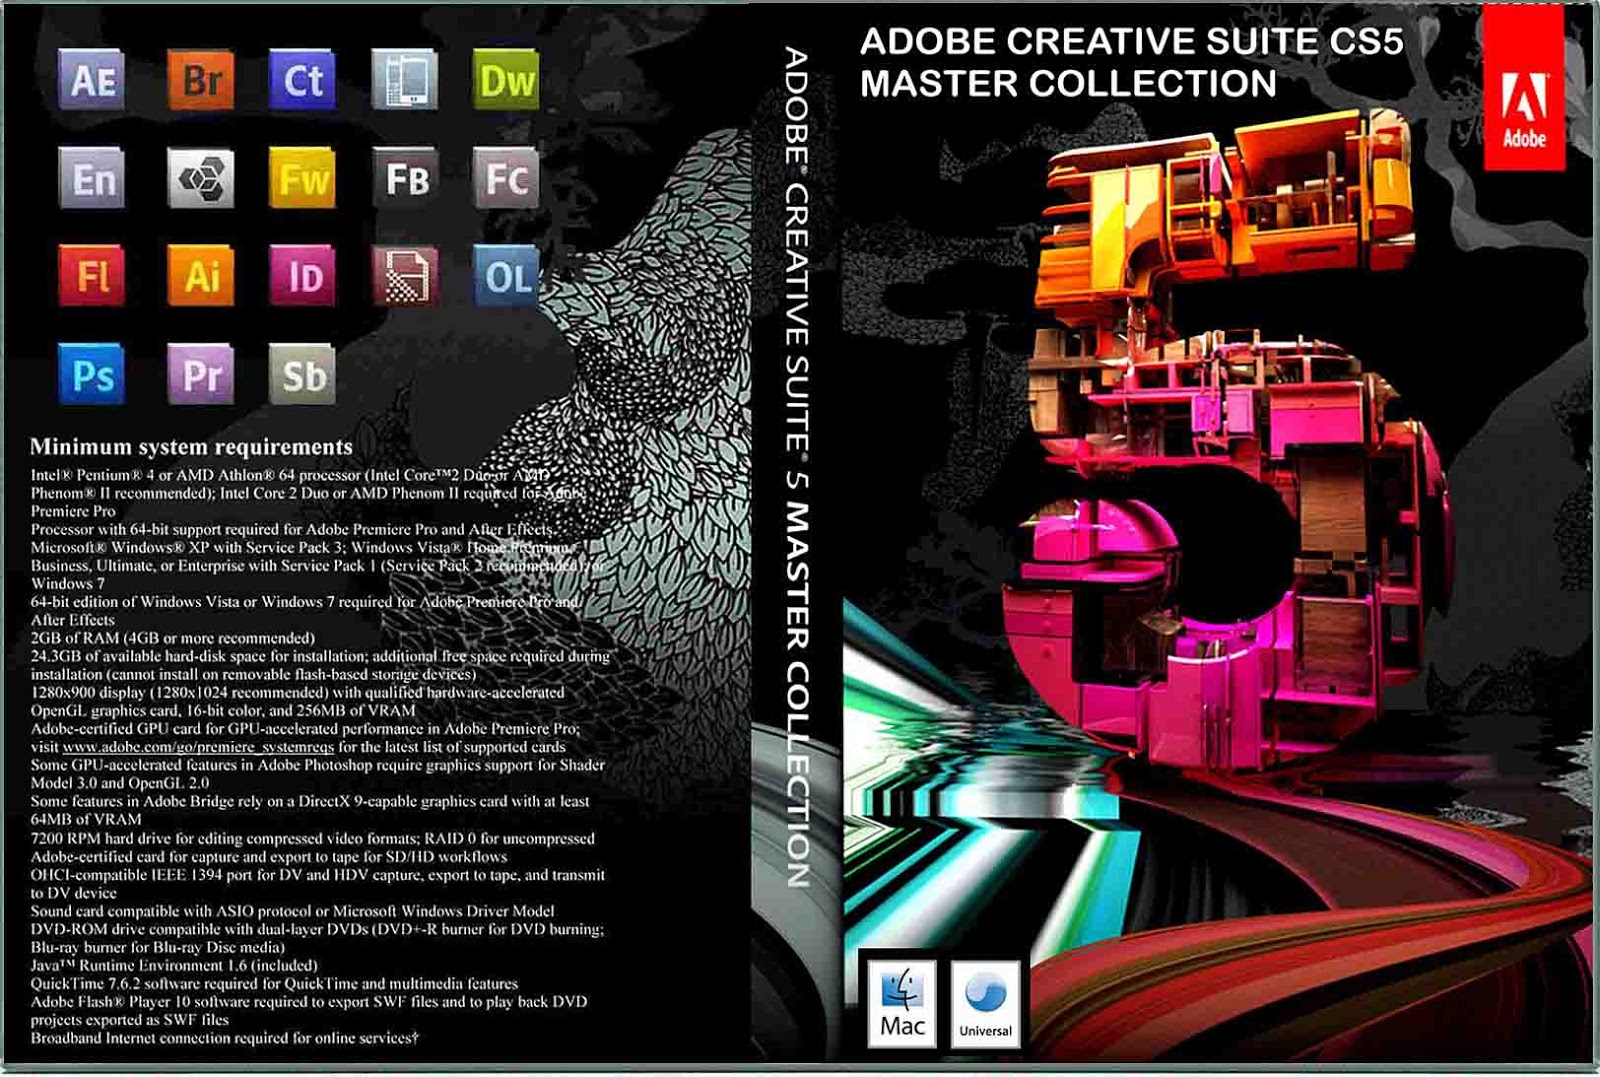 what is in adobe creative suite 5.5 master collection for mac